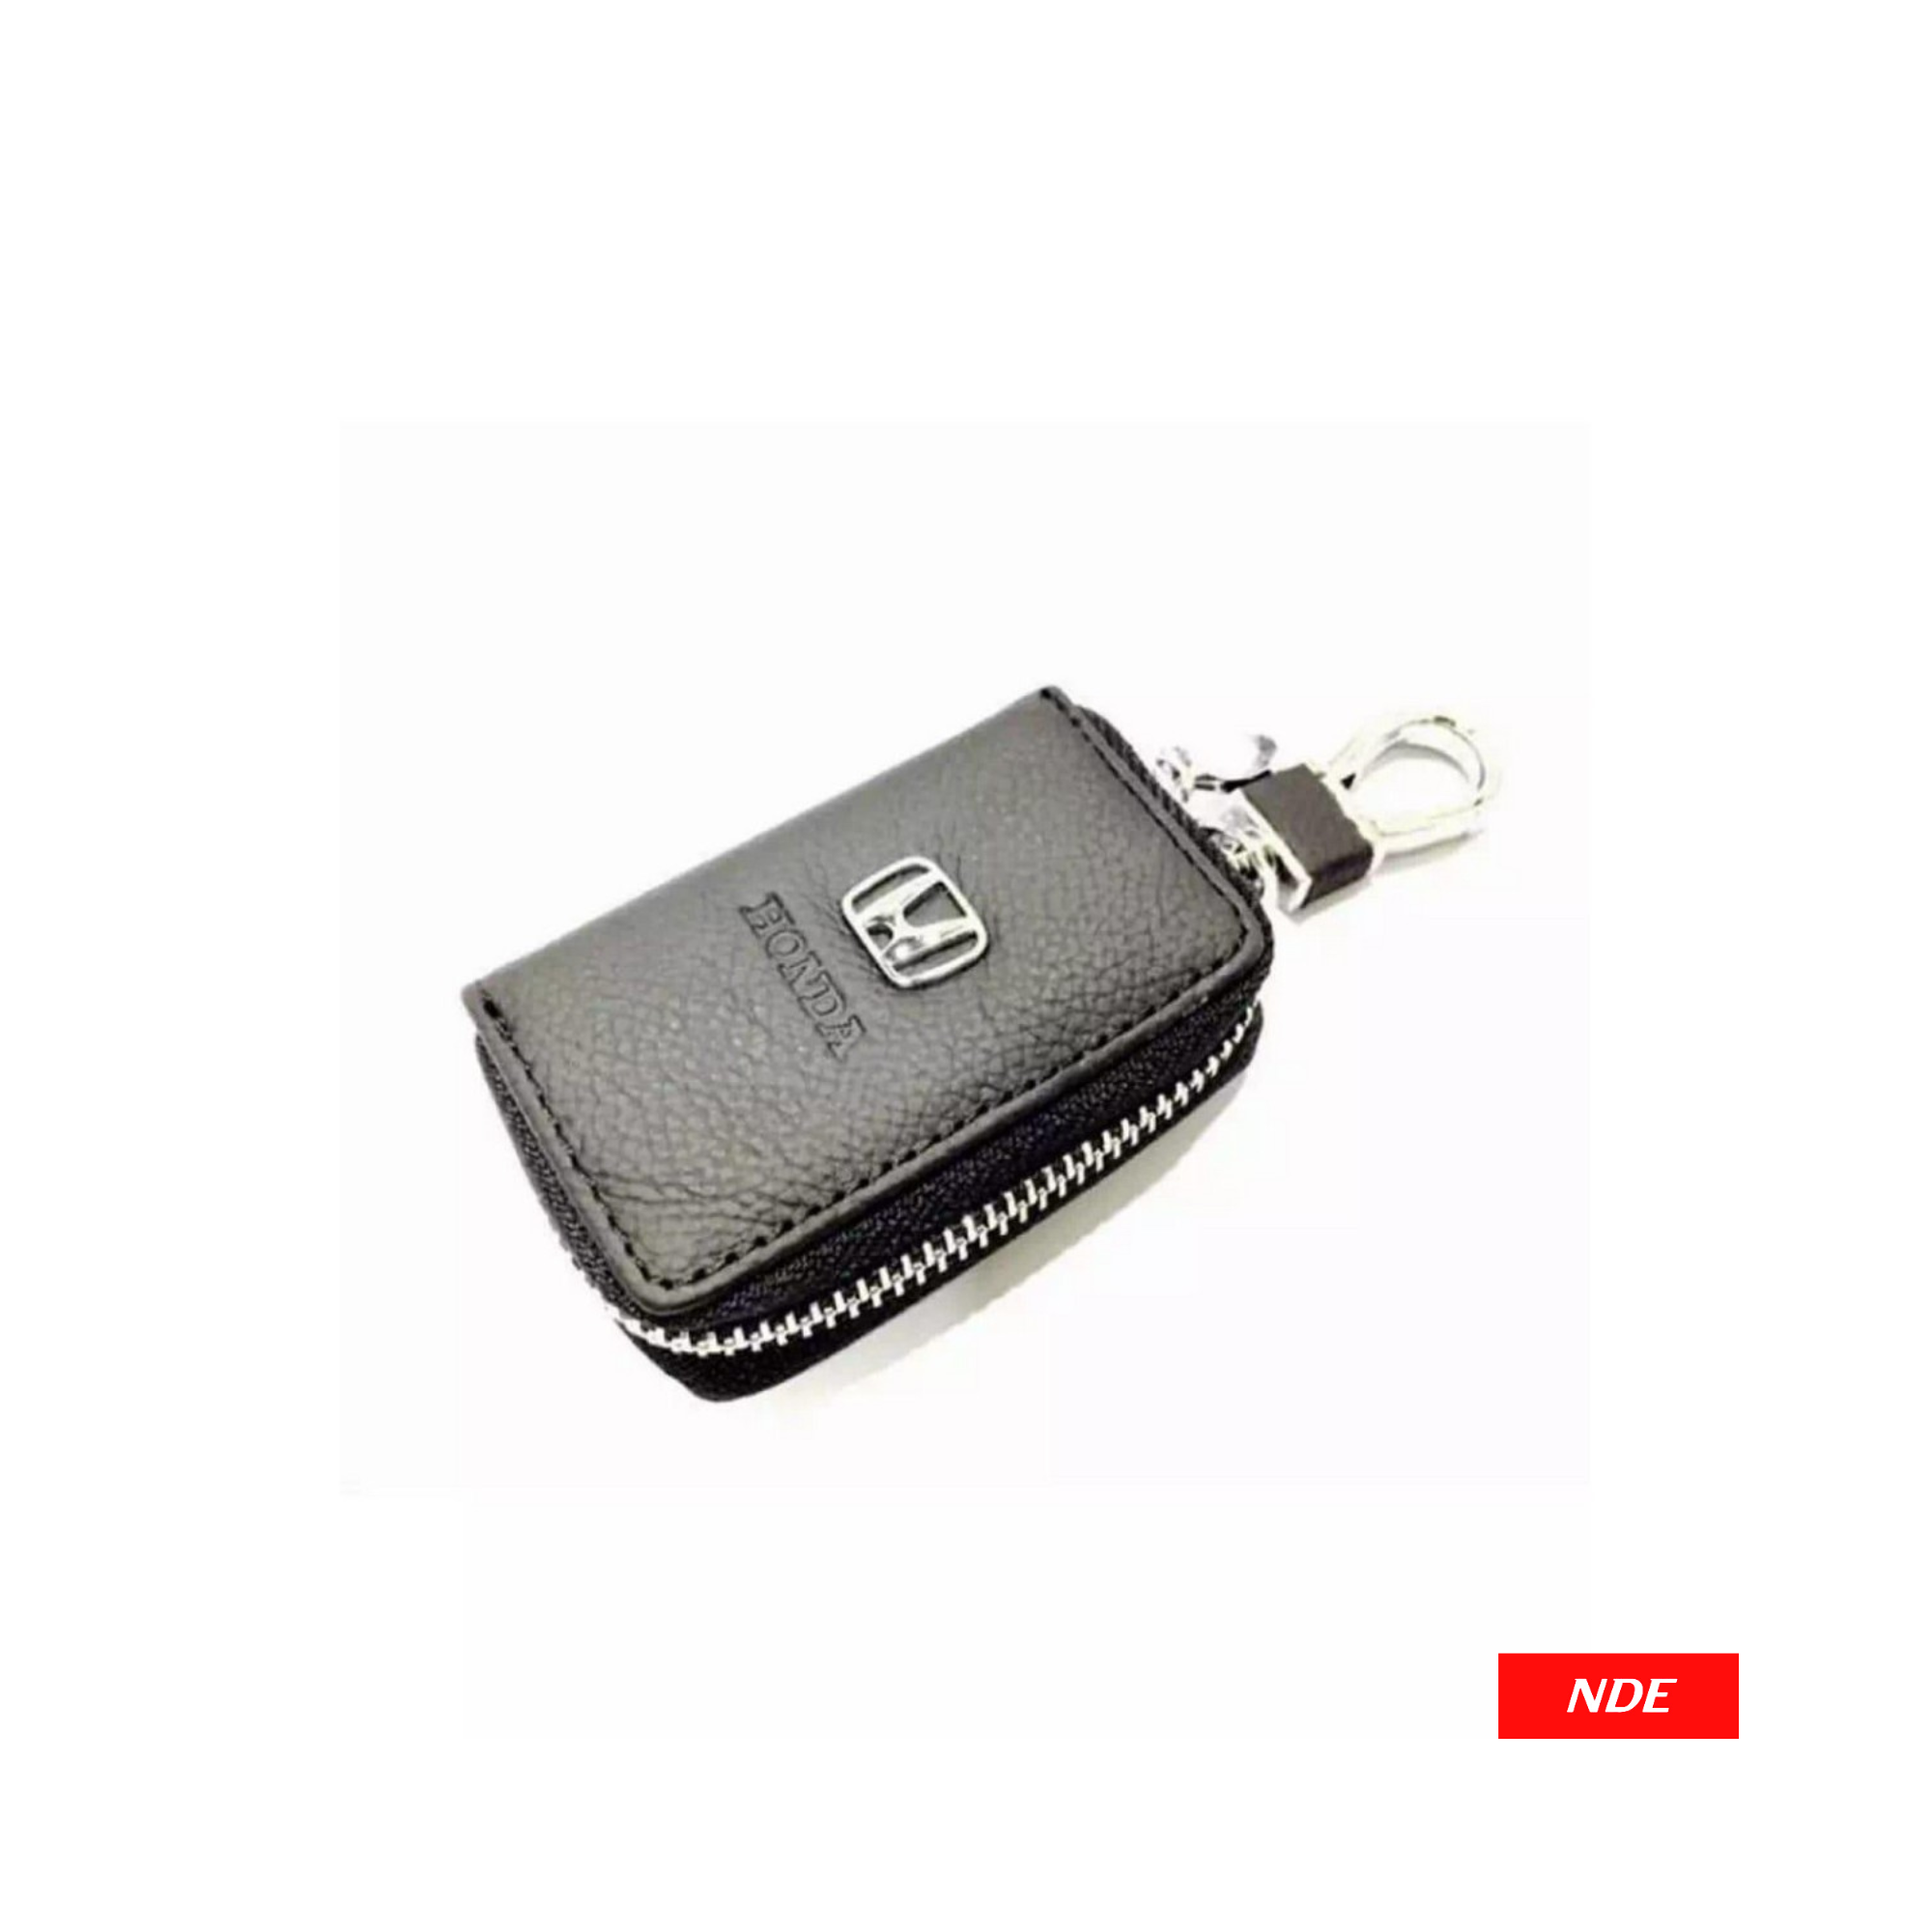 REMOTE COVER KEY POUCH ZIPPER PREMIUM LEATHER MATERIAL WITH HONDA LOGO (MADE IN CHINA)